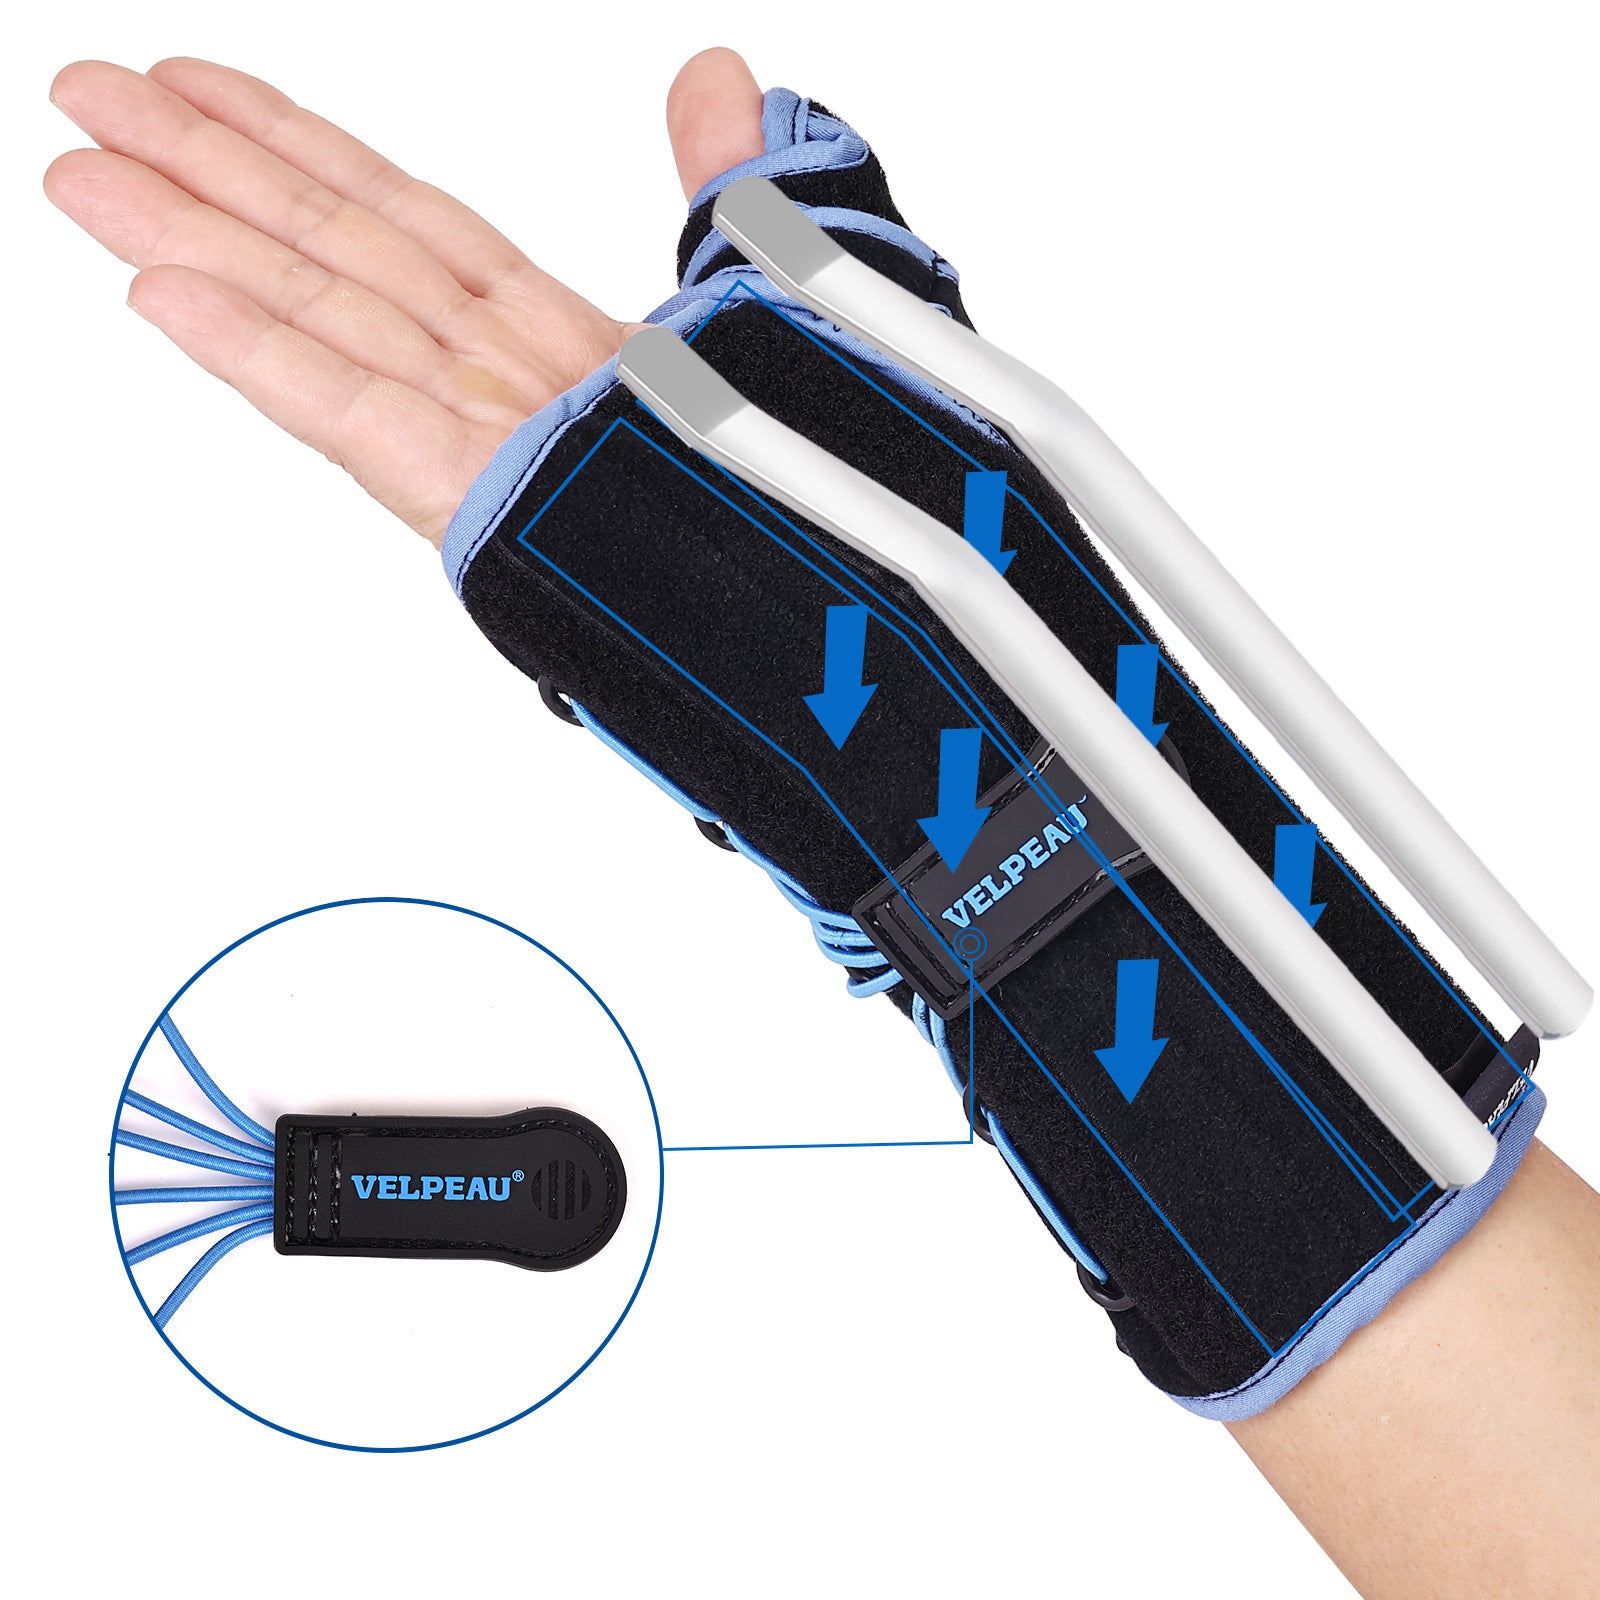 Wrist Support VELPEAU Wrist Splint Support For Carpal Tunnel Syndrome And  Pain Relif Adjustable Wrist Brace With Drawstring Zln231113 From Tales02,  $15.71